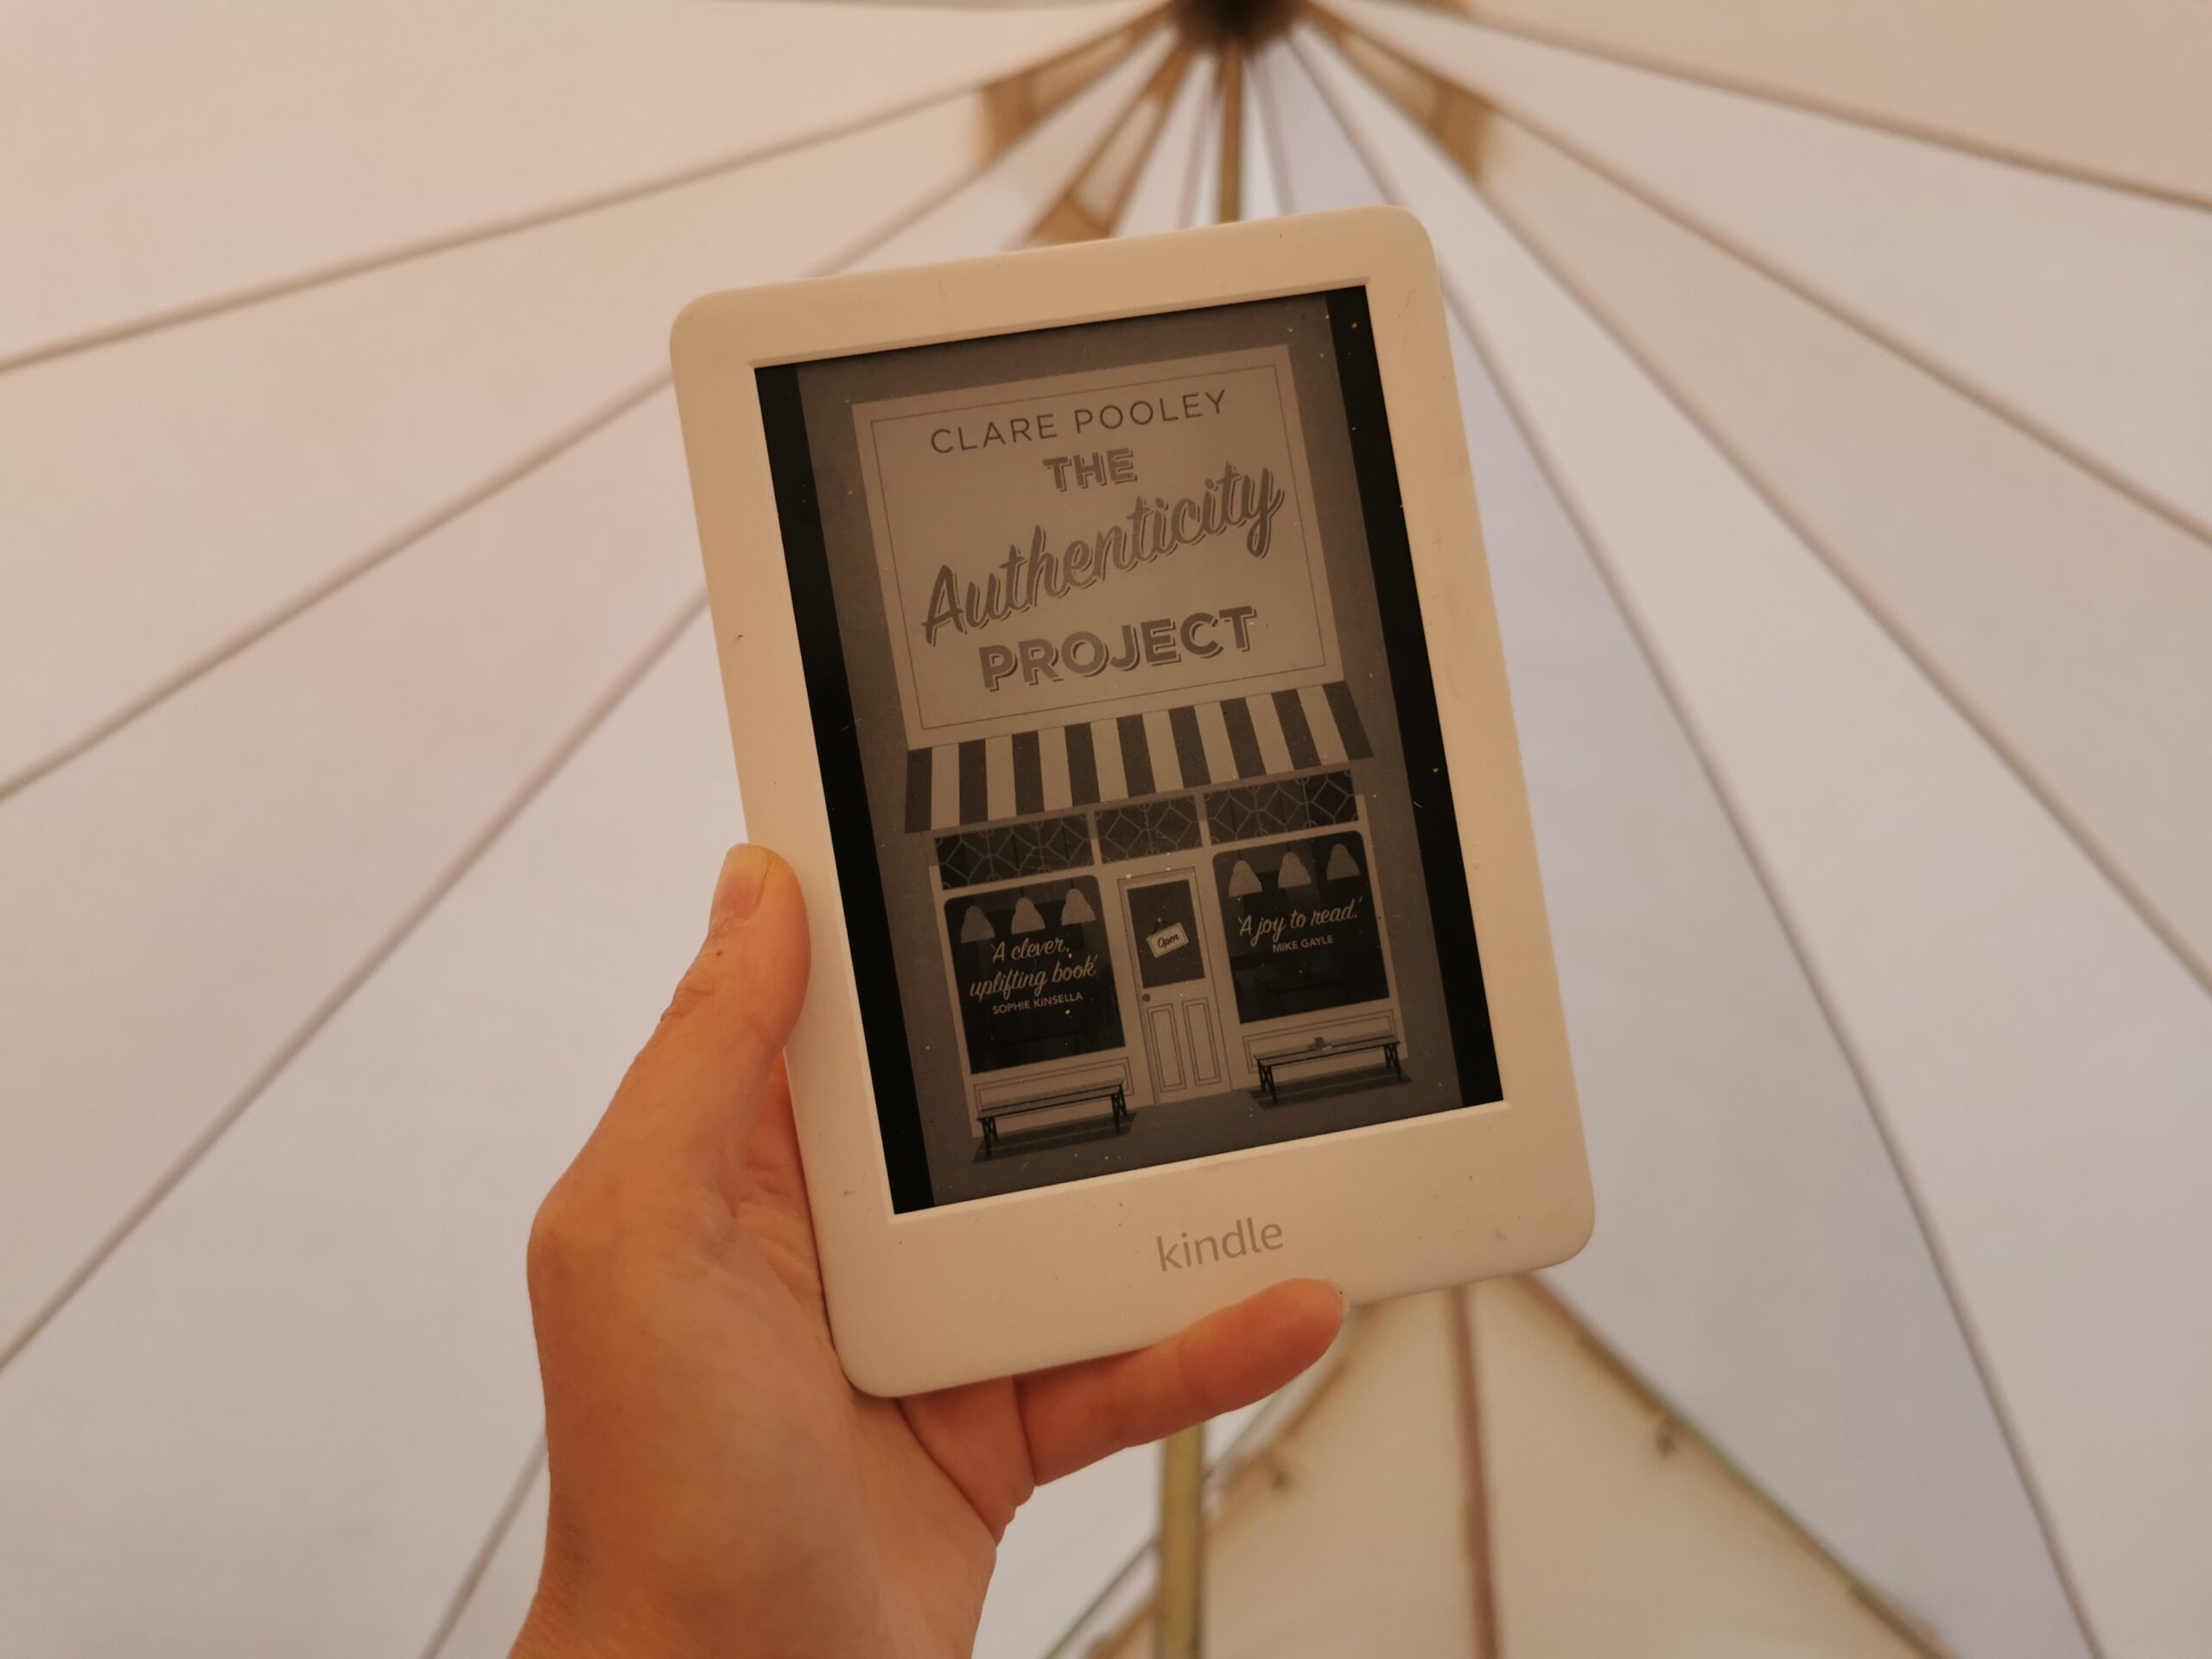 kindle book being held up in tent